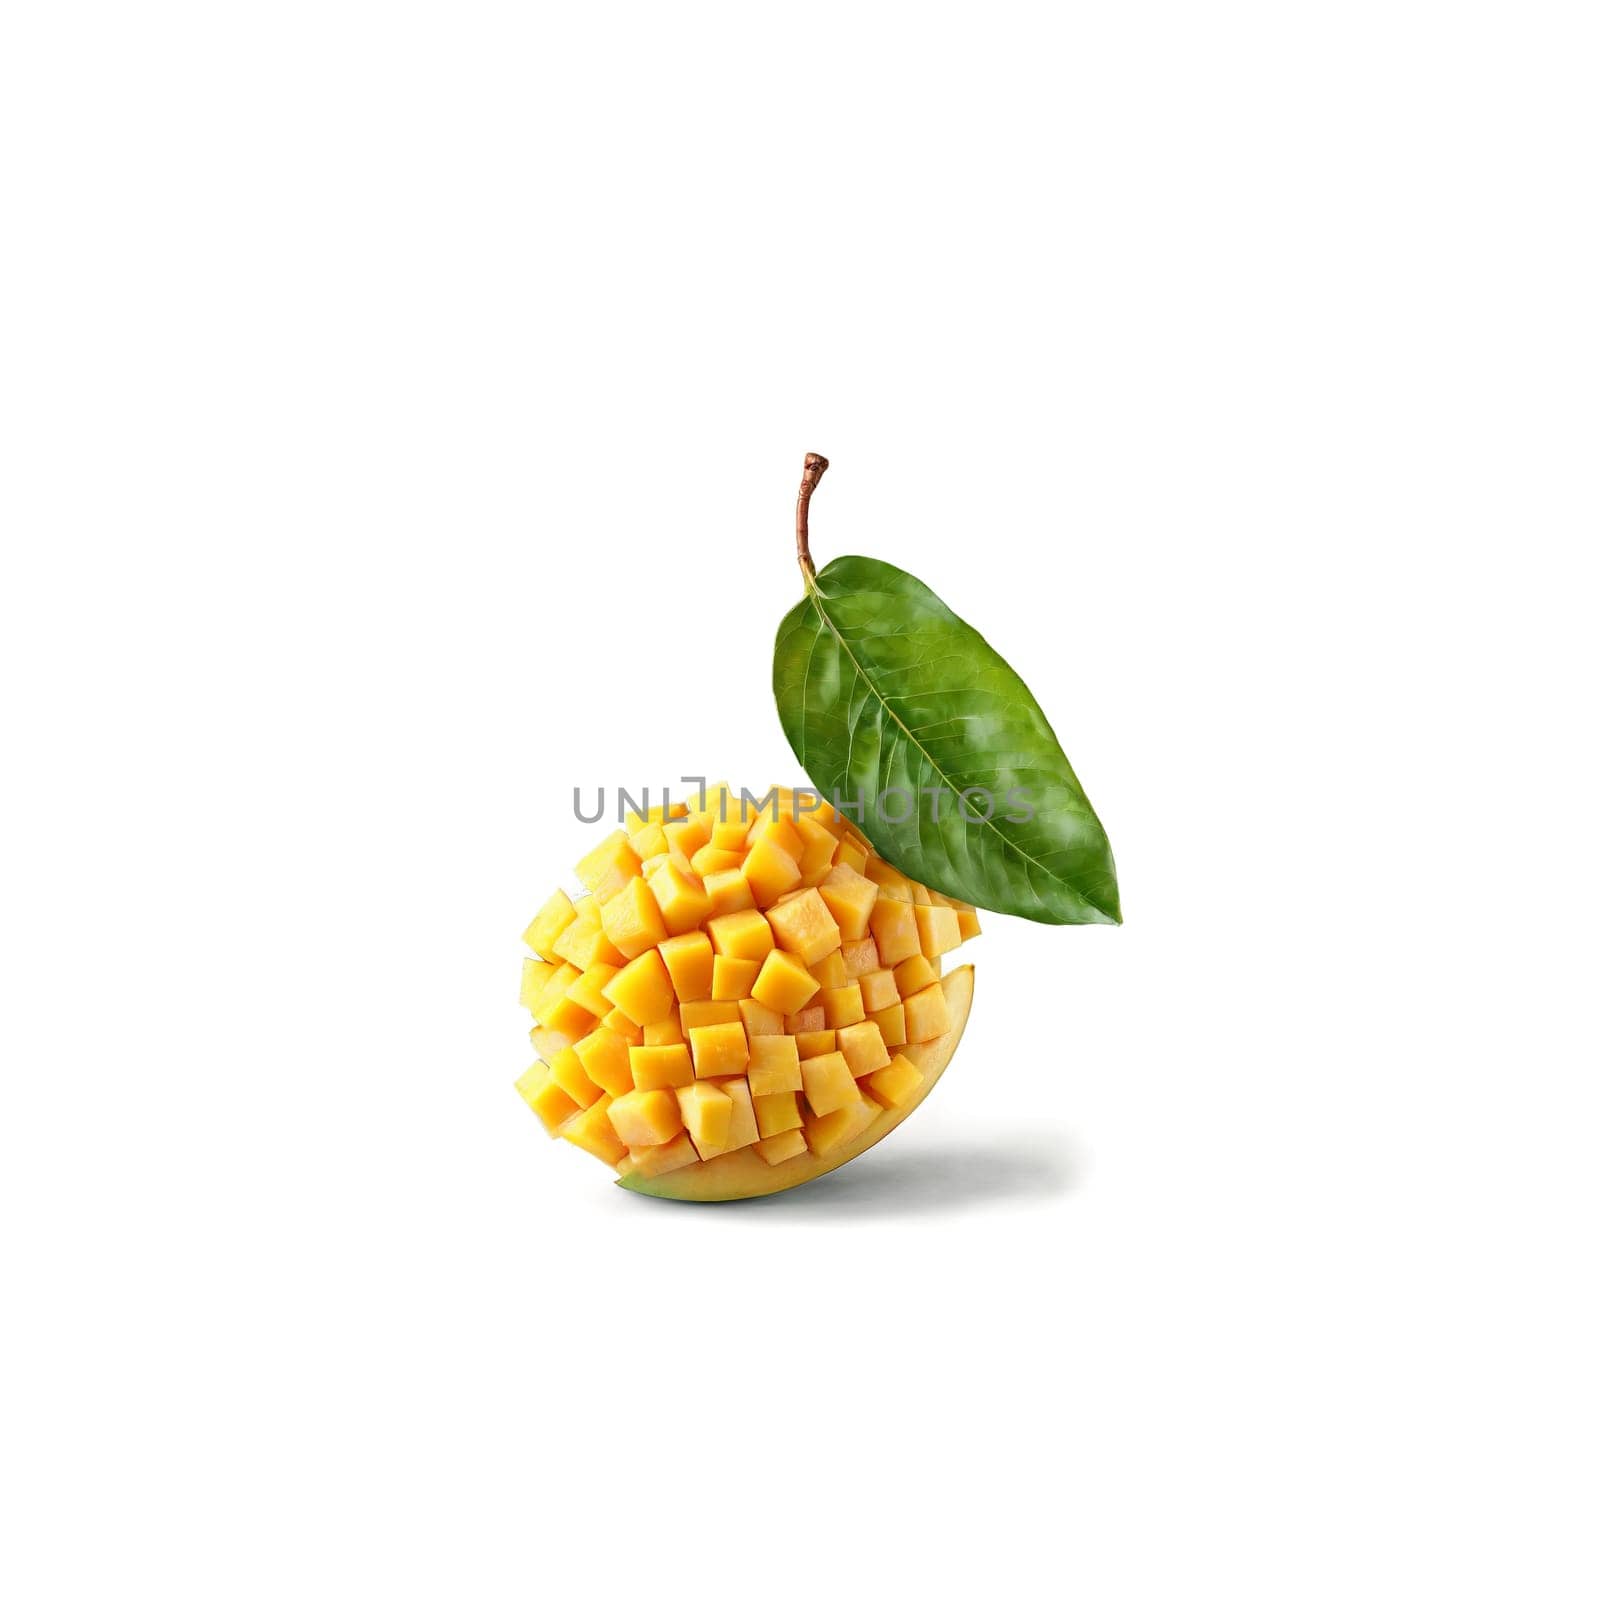 Mango with cubed flesh and skin peeled back in spiral motion Food and culinary concept. Food isolated on transparent background.